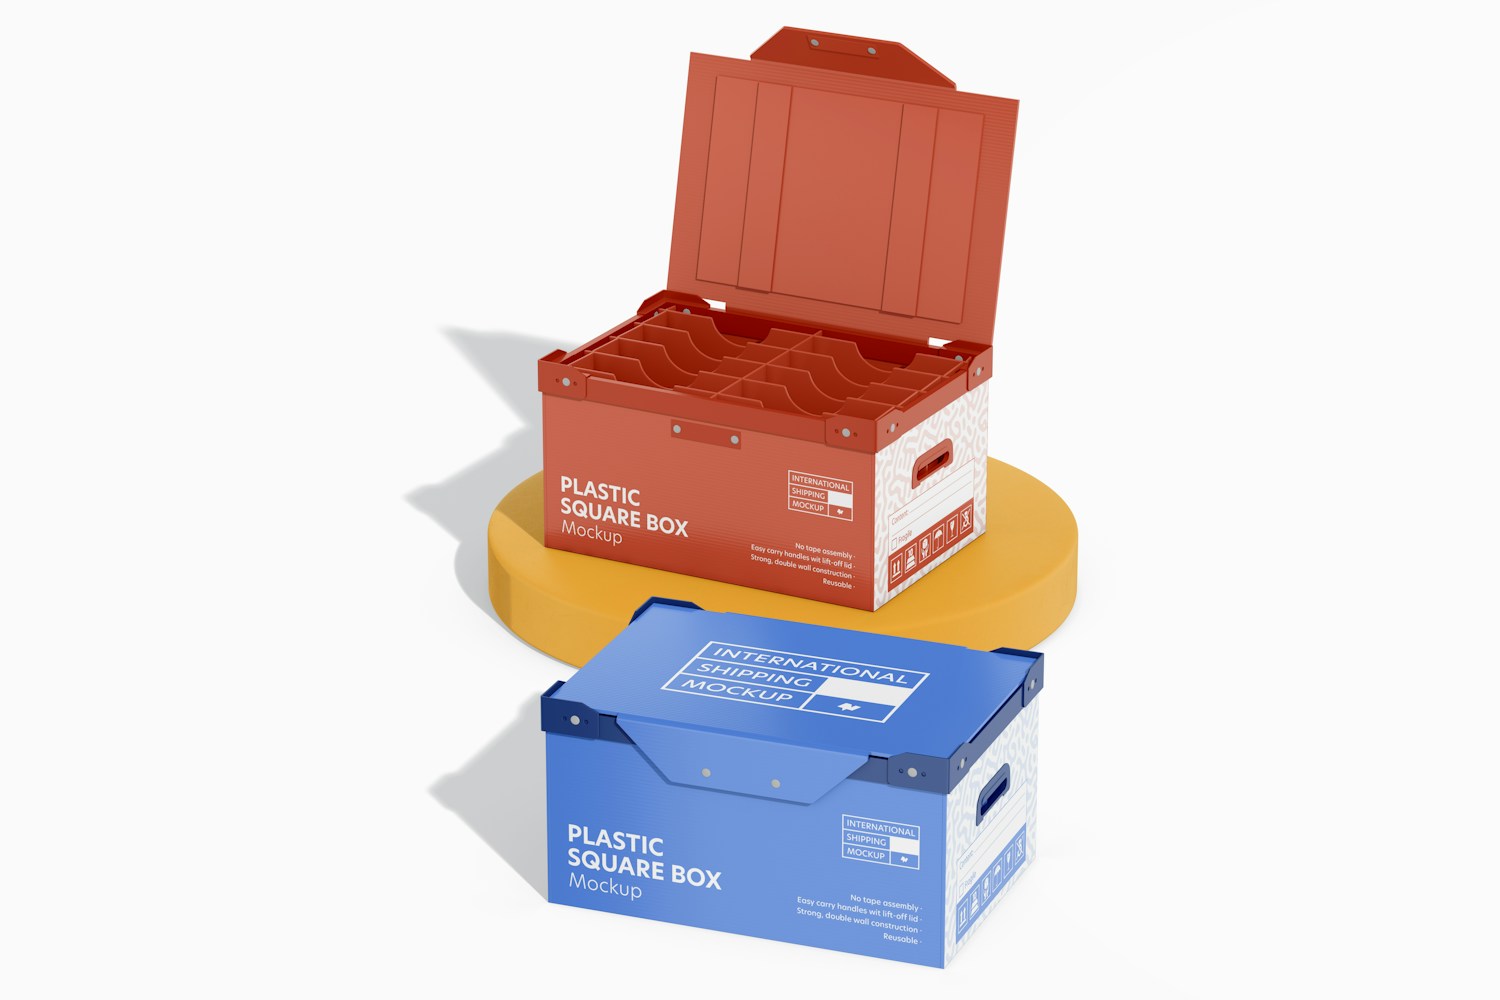 Plastic Square Boxes Mockup, Opened and Closed